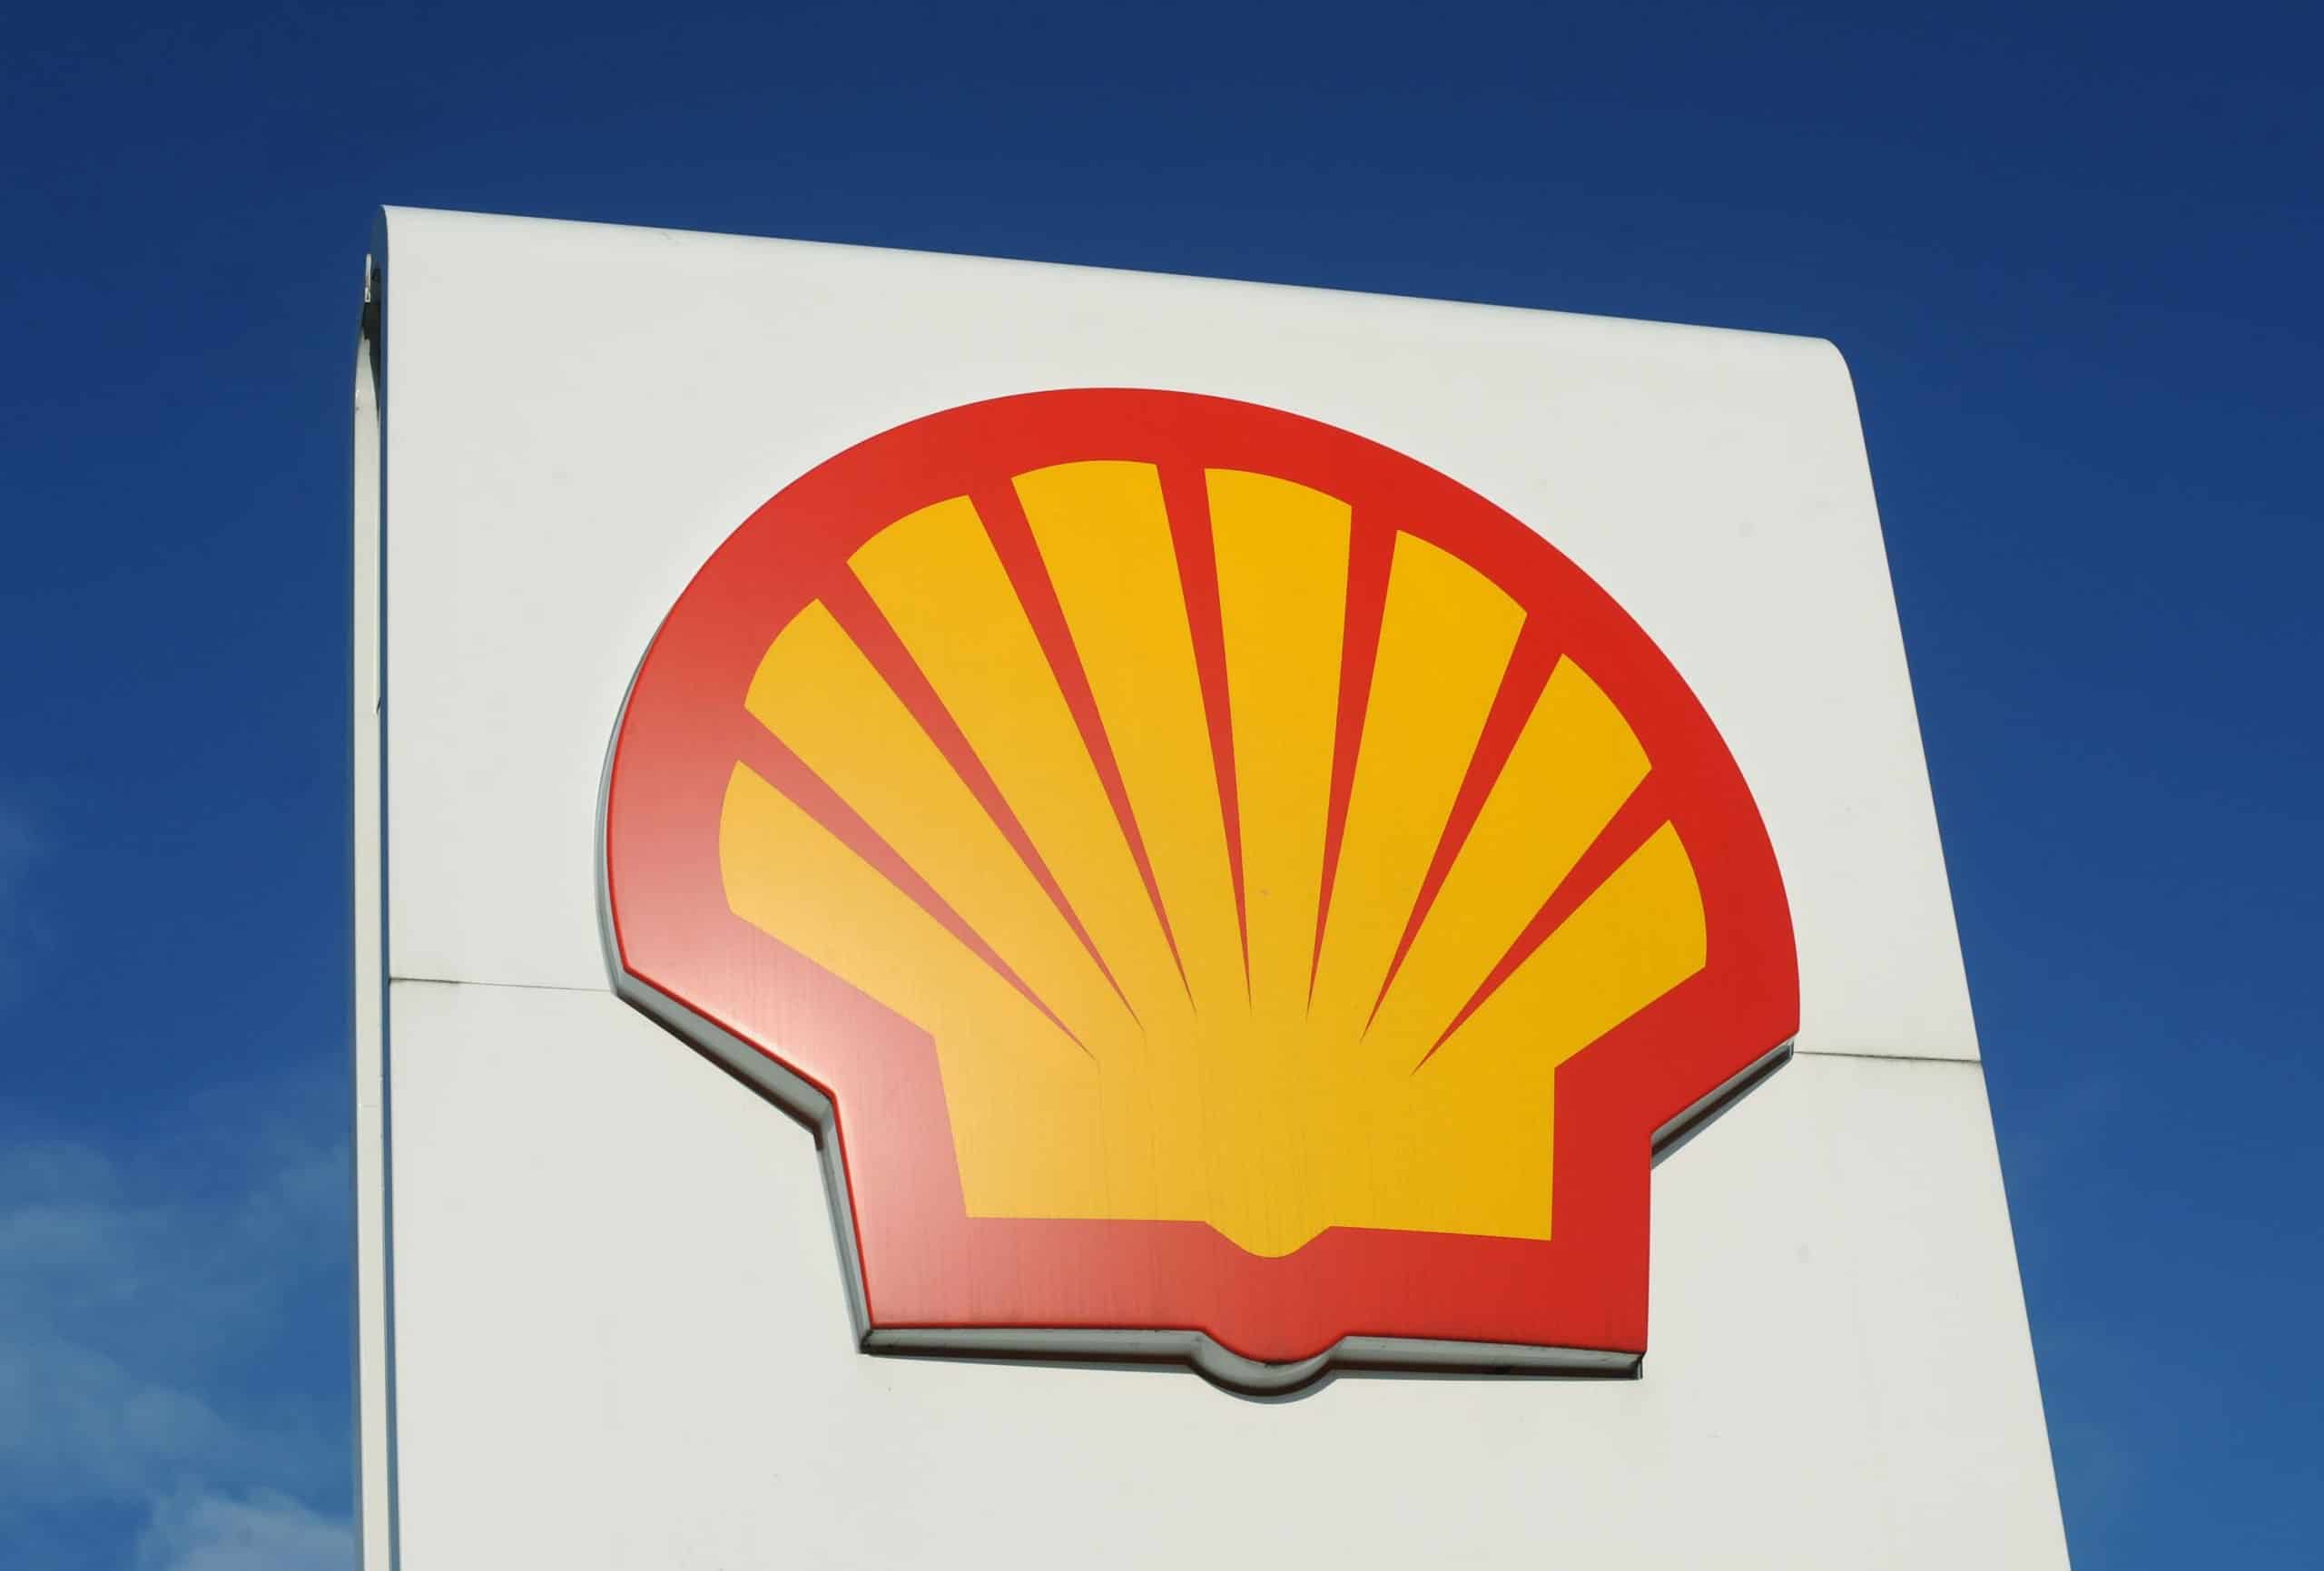 Anger as Shell profits rocket to ‘obscene’ 115-year high